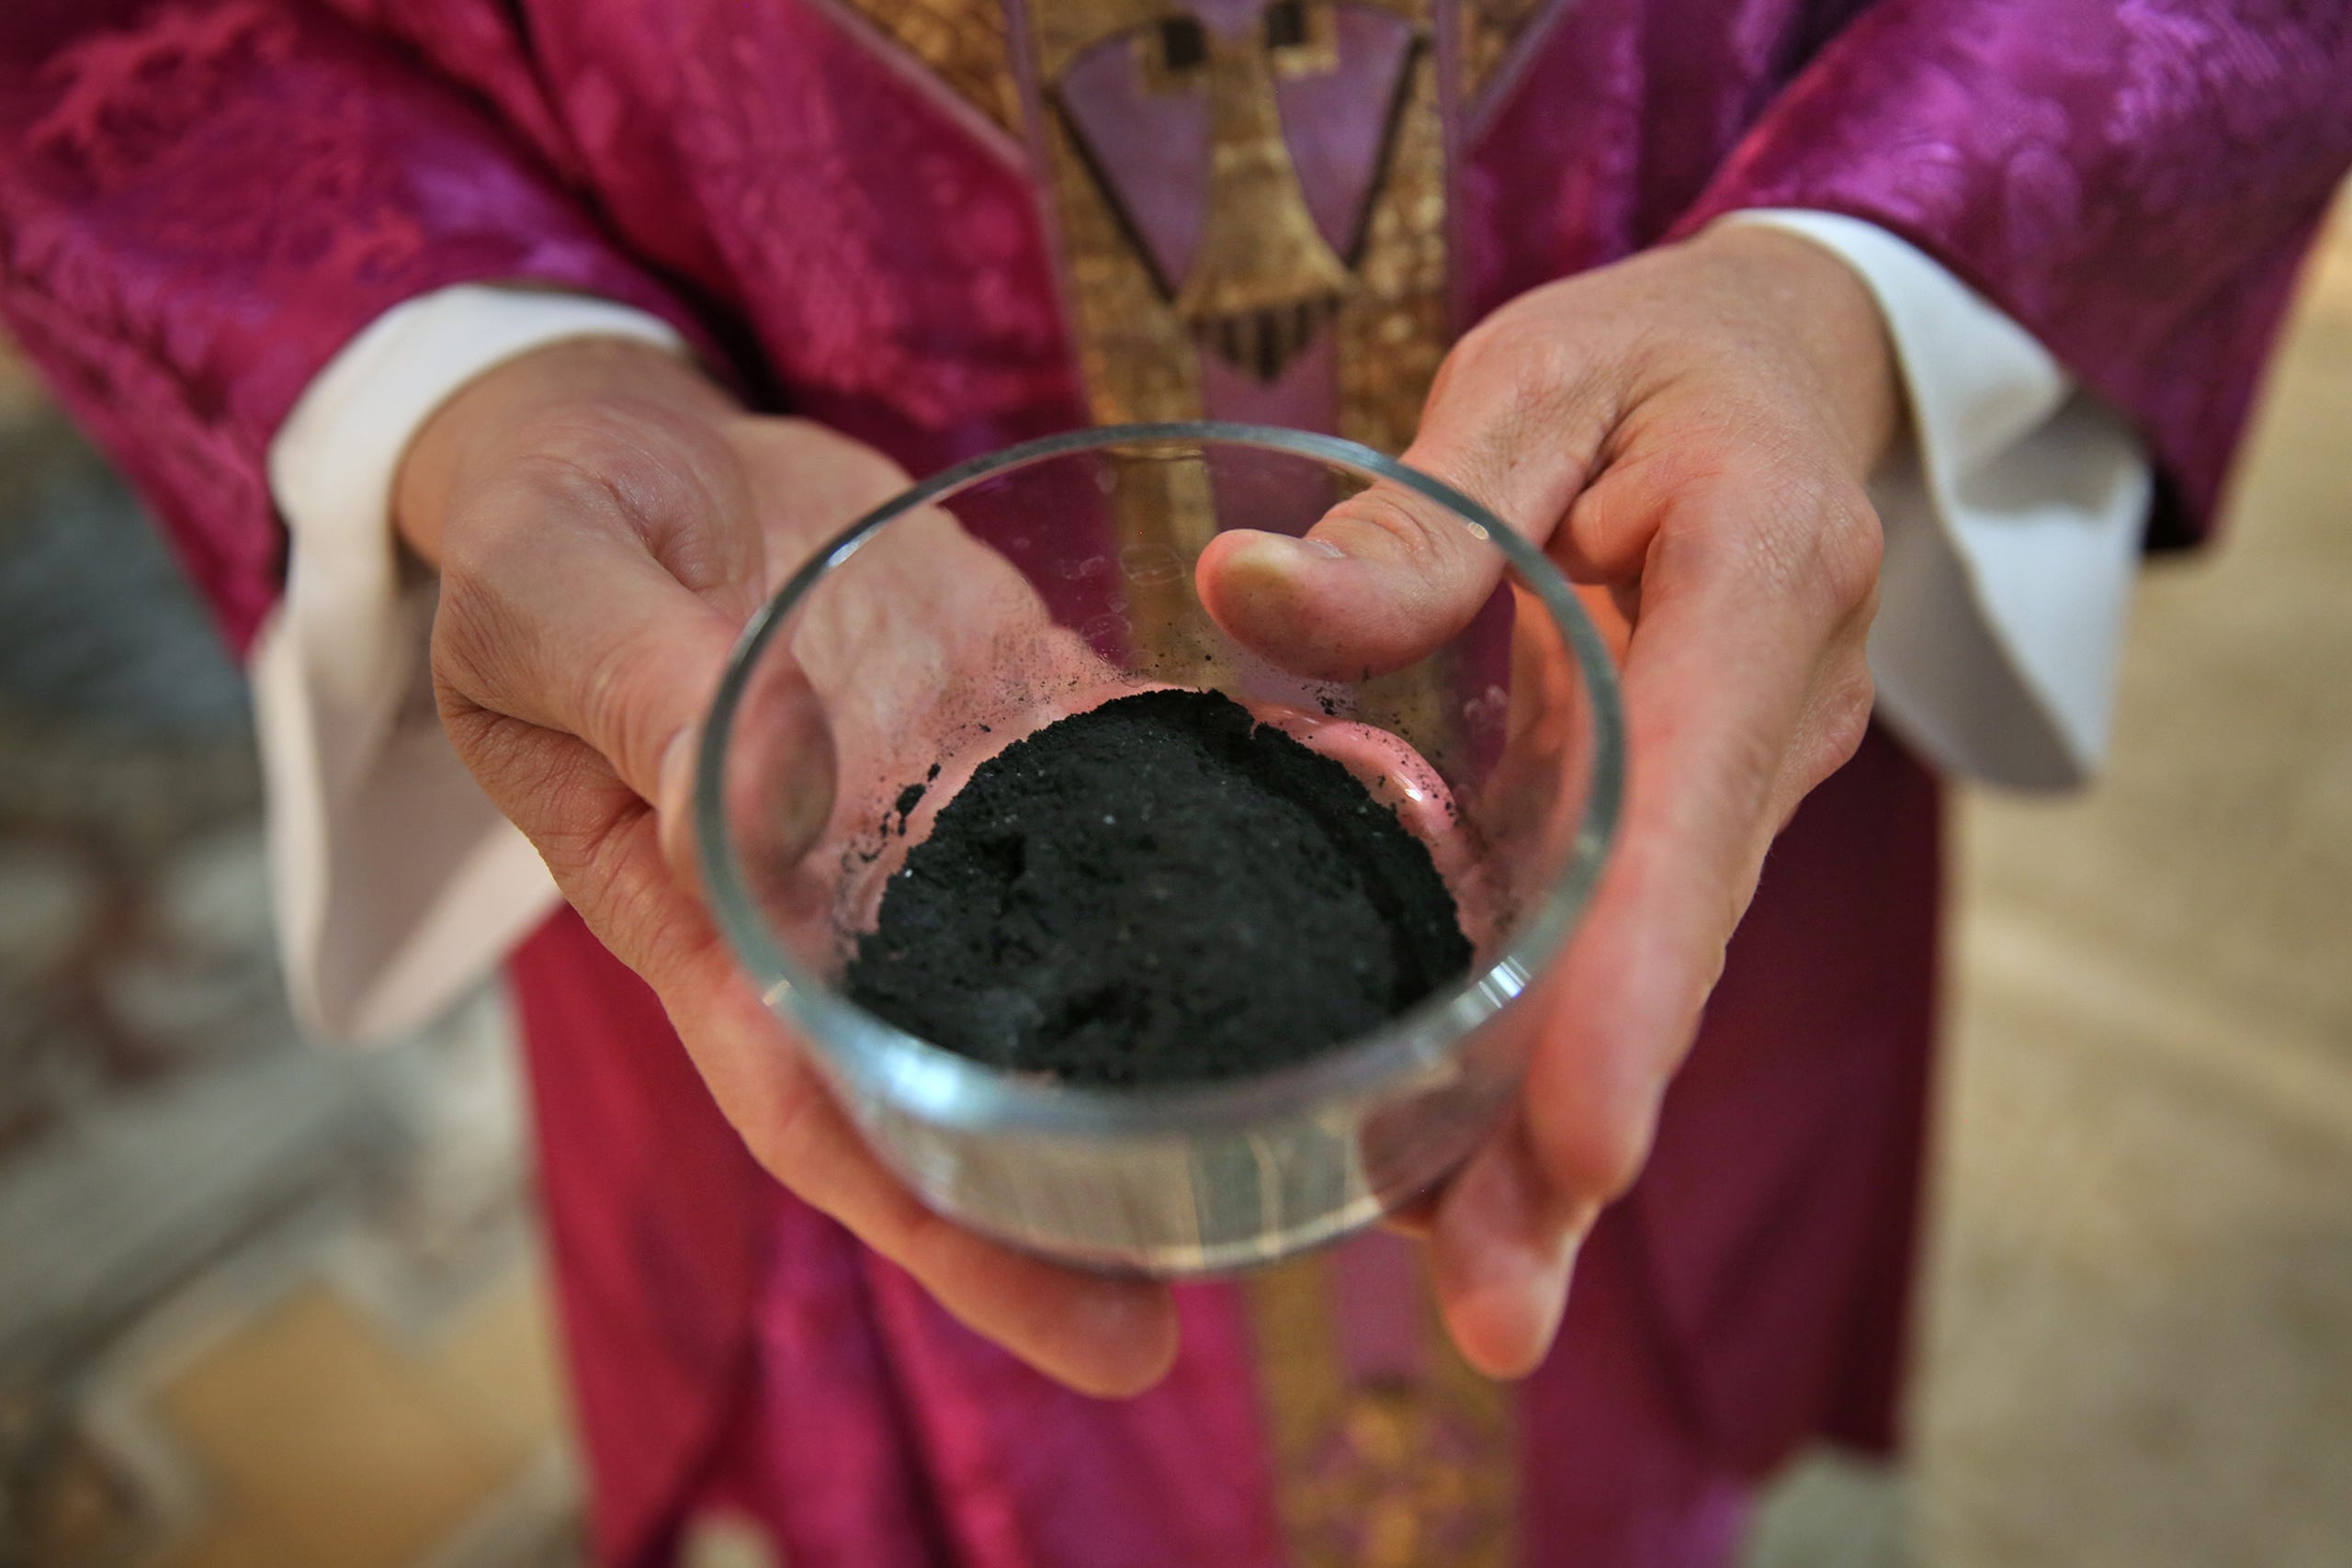 Father Rick Nagel shows the ashes used during Ash Wednesday service at Saint John Catholic Church, Wednesday, February 10, 2016.